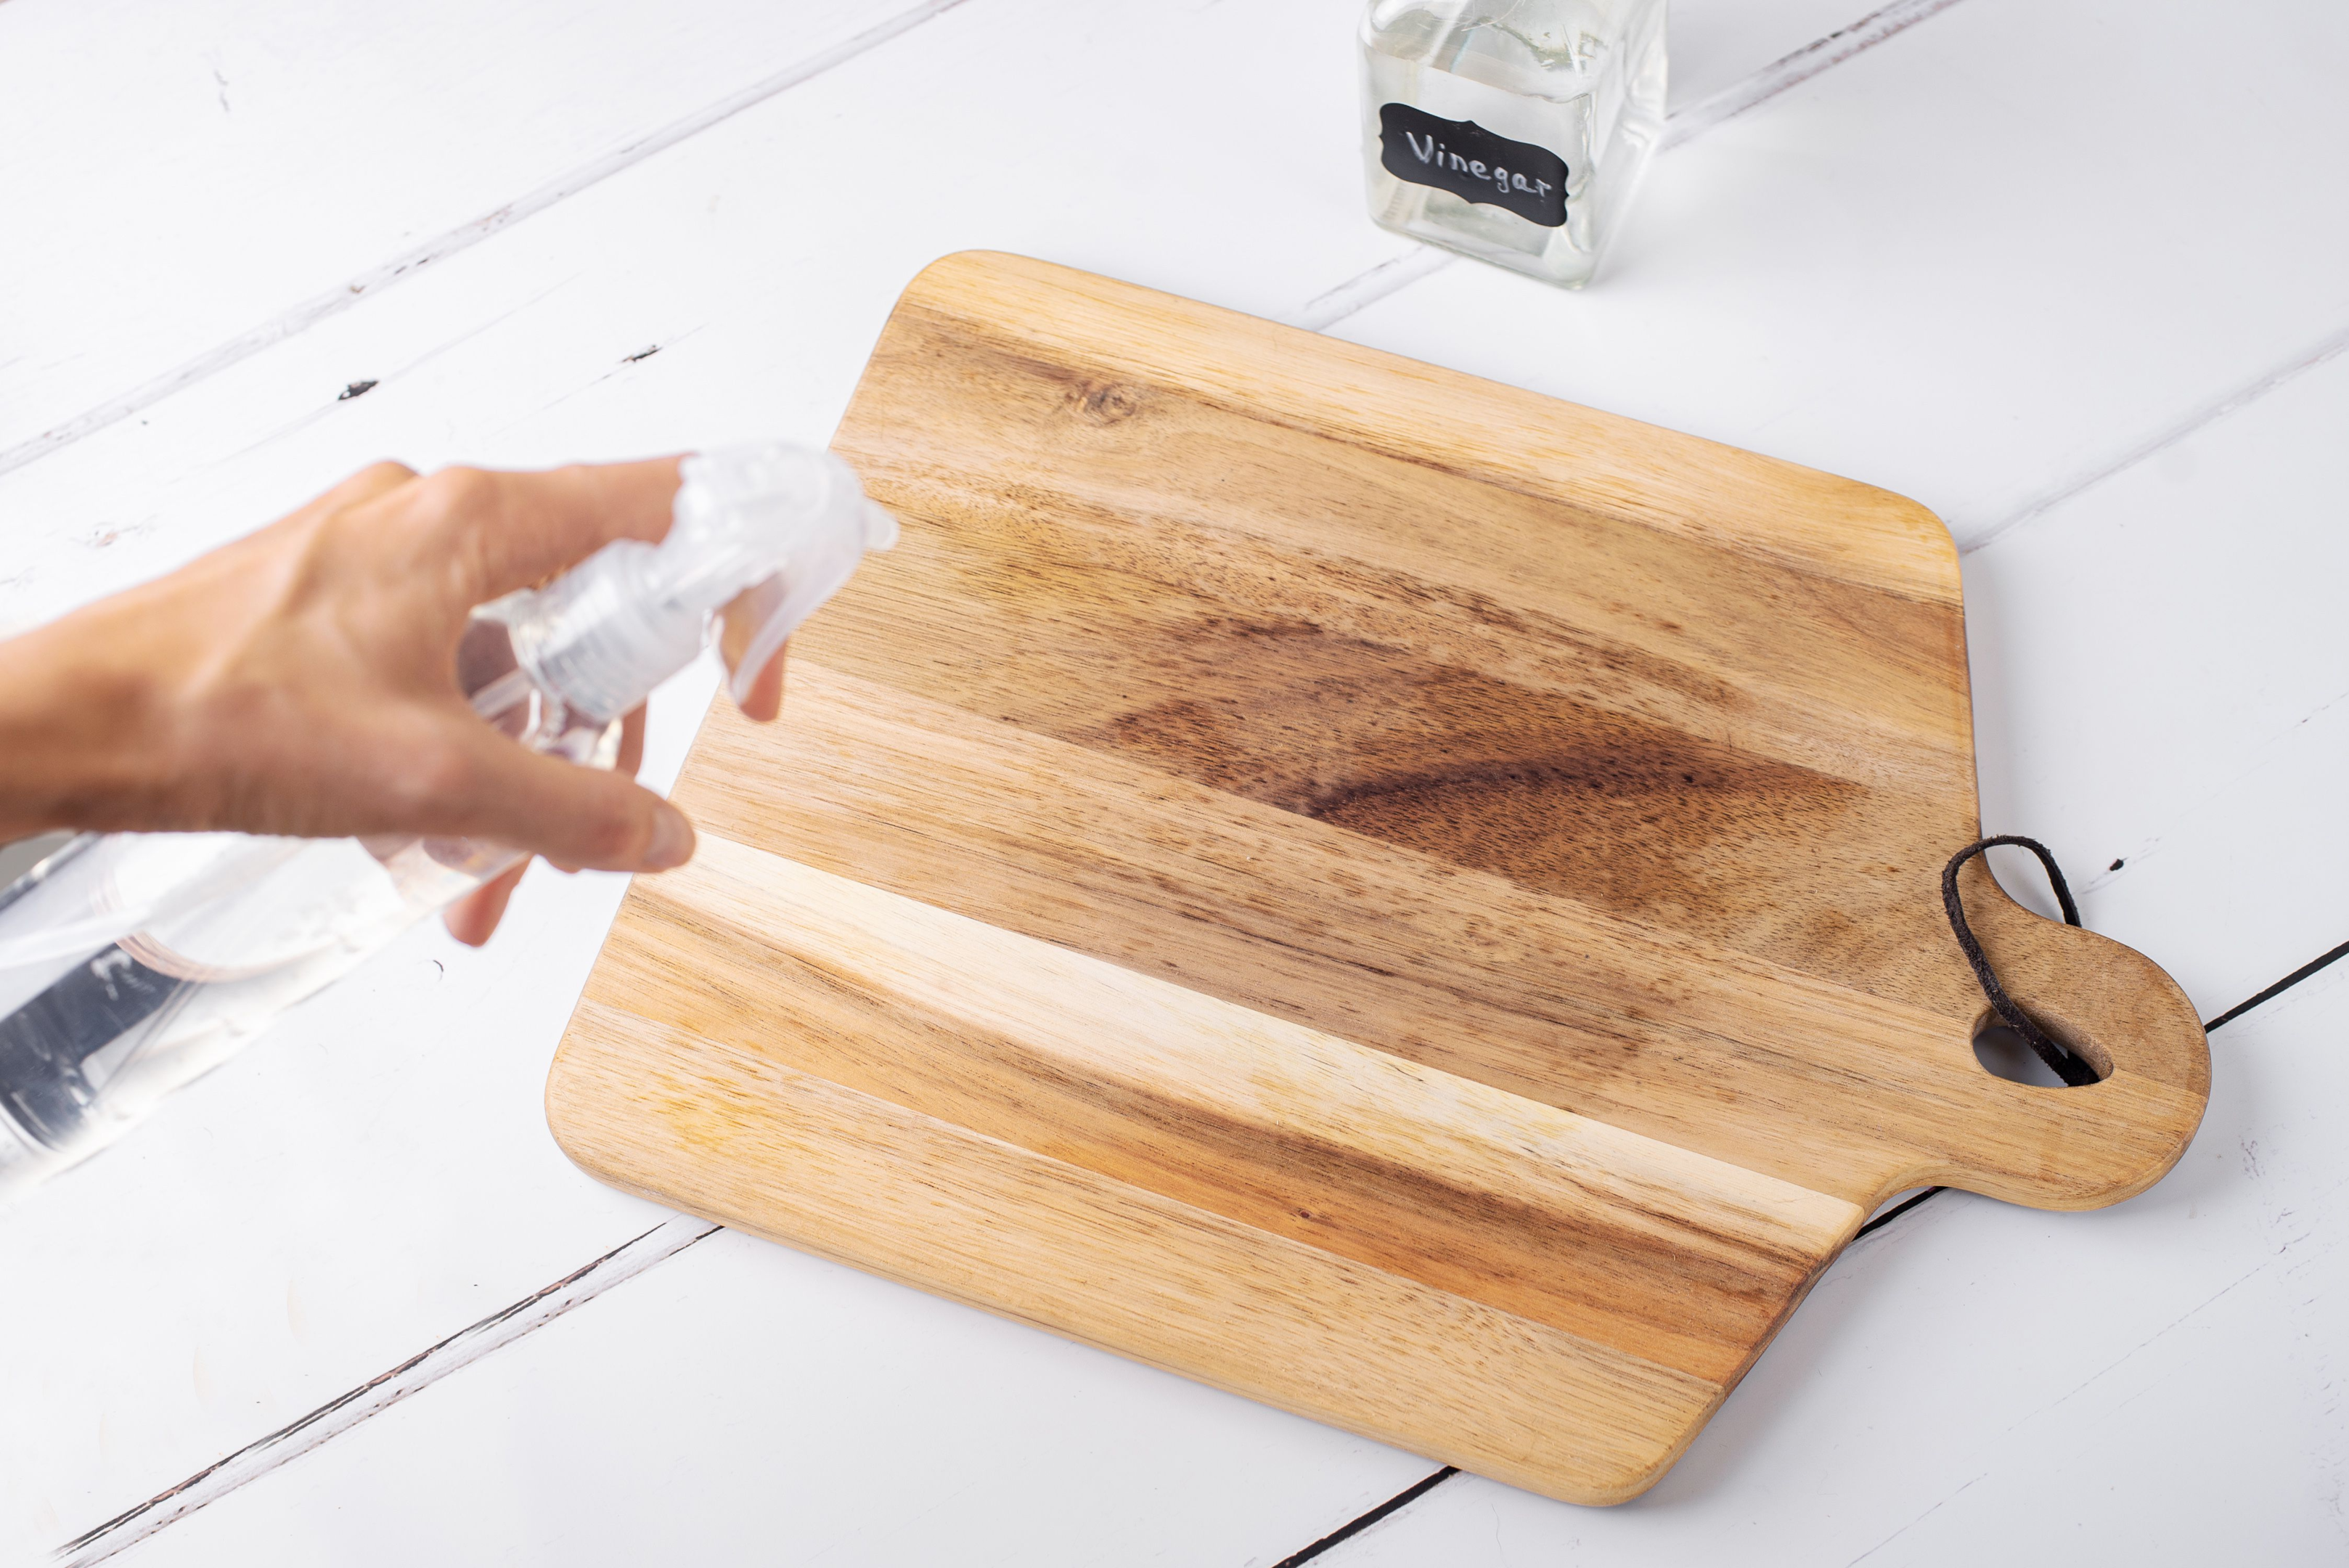 Glass or wooden chopping board? Learn ways to effectively clean